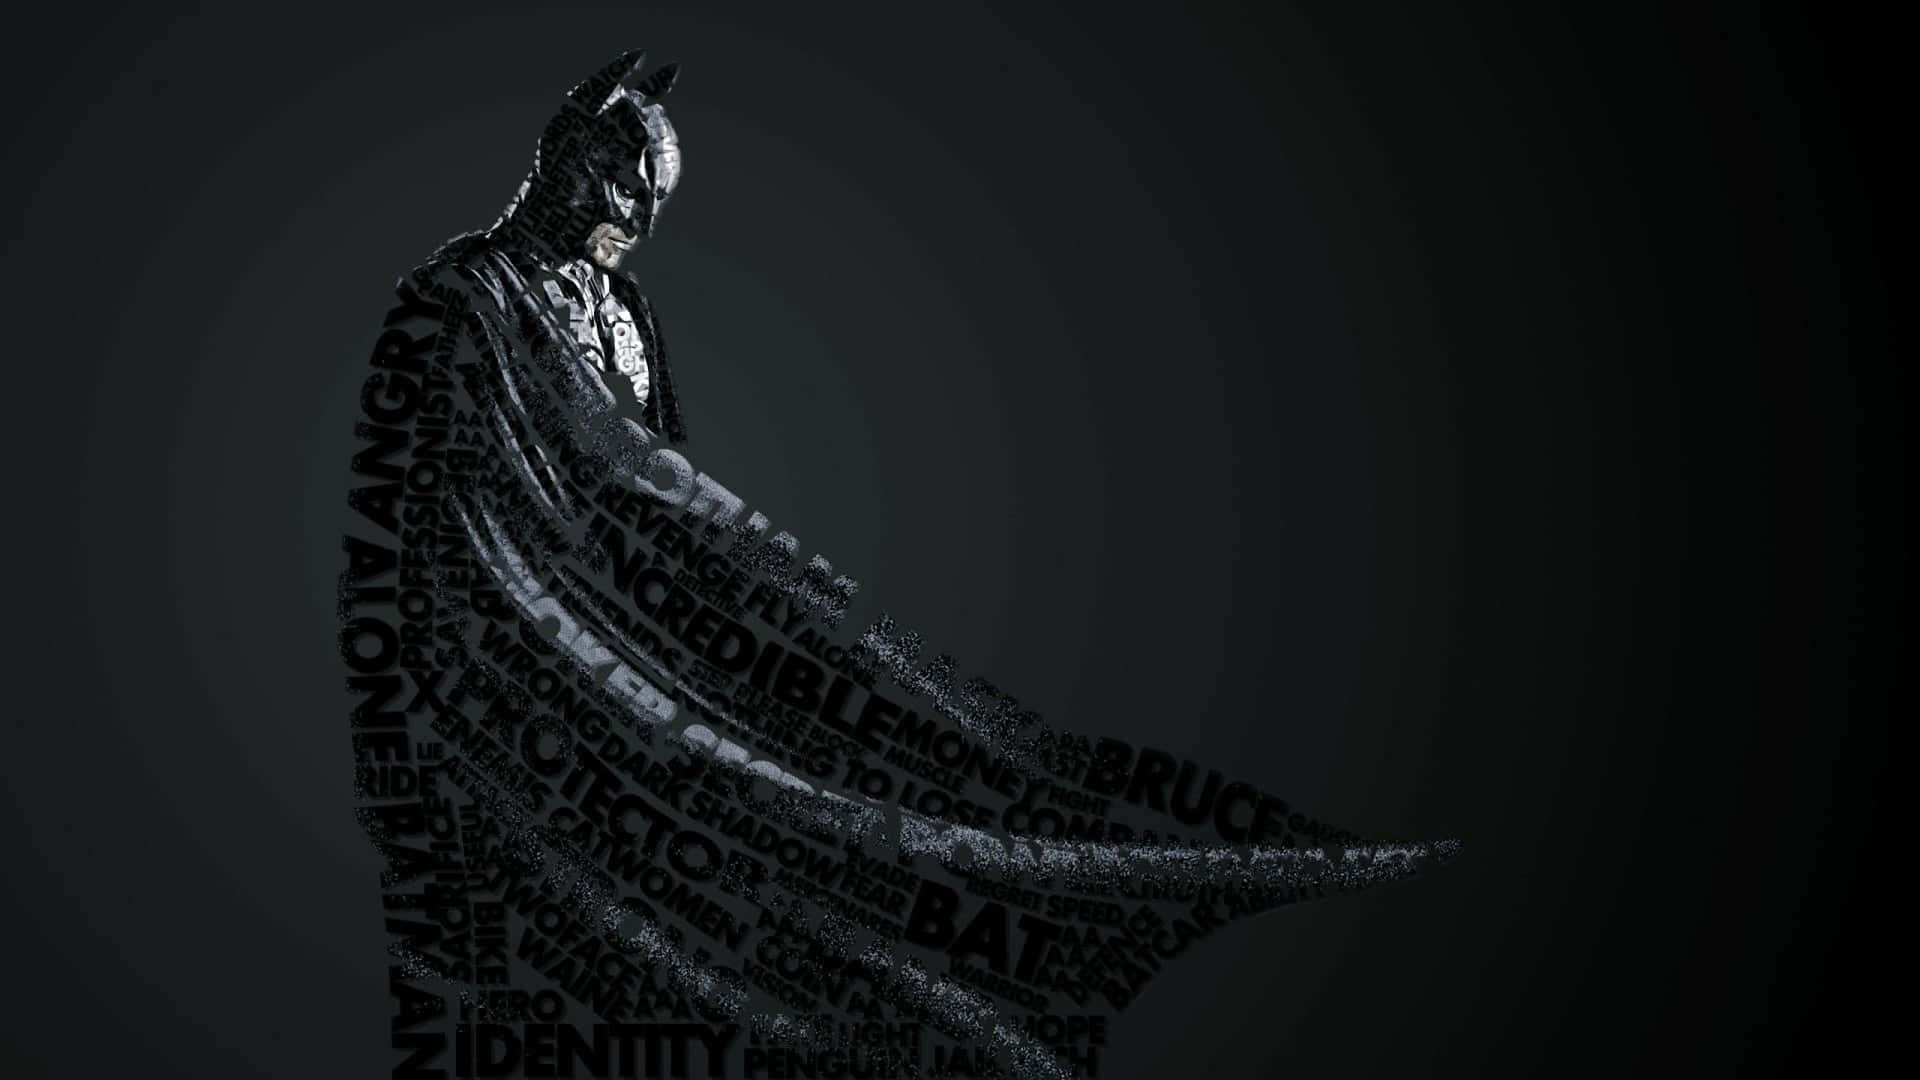 Batman in Action, Ready for Anything Wallpaper